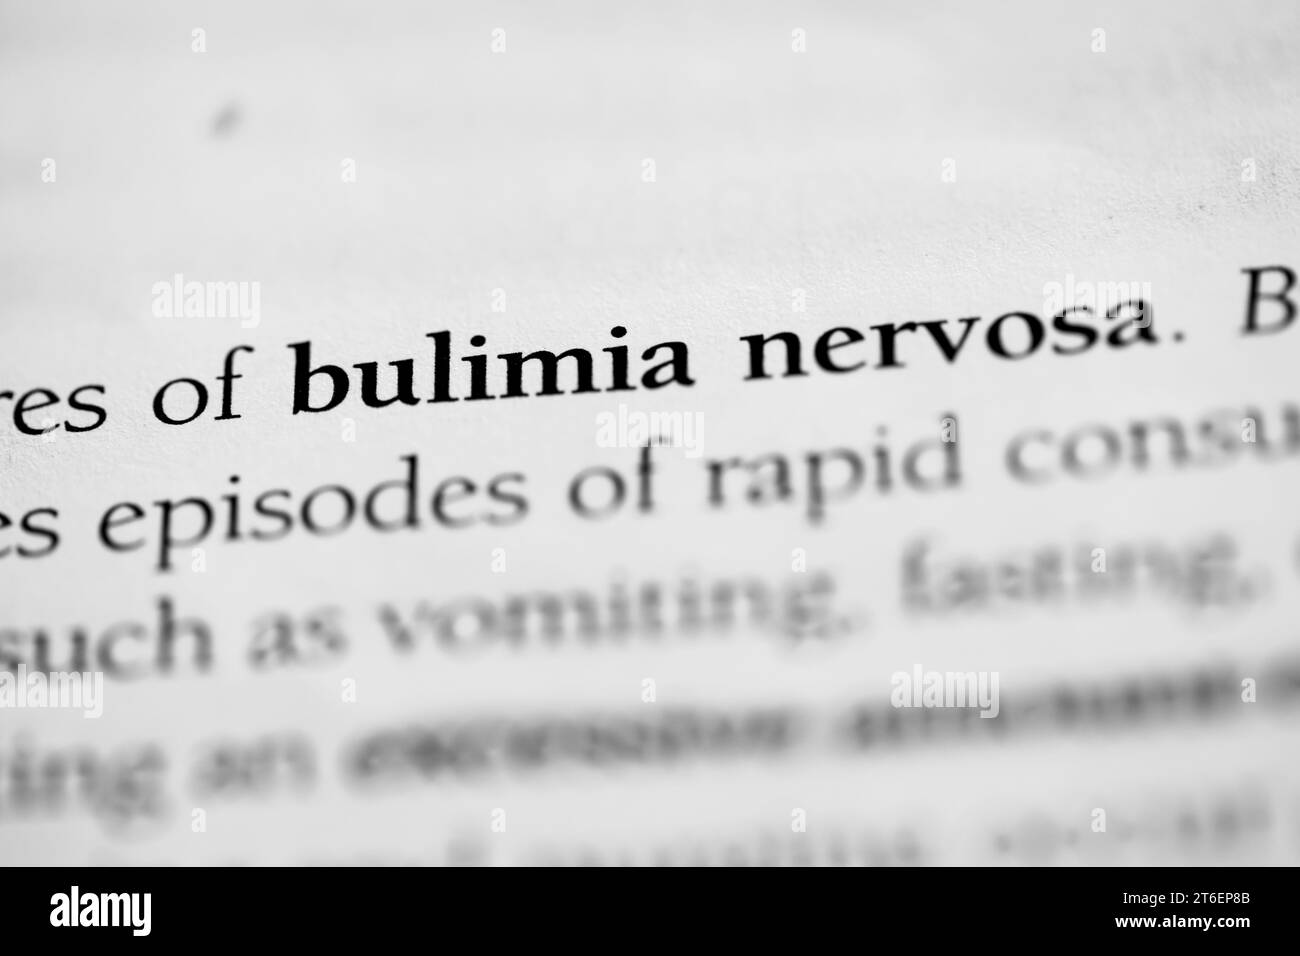 A close-up of the psychological eating disorder term 'Bulimia nervosa' on a white background Stock Photo